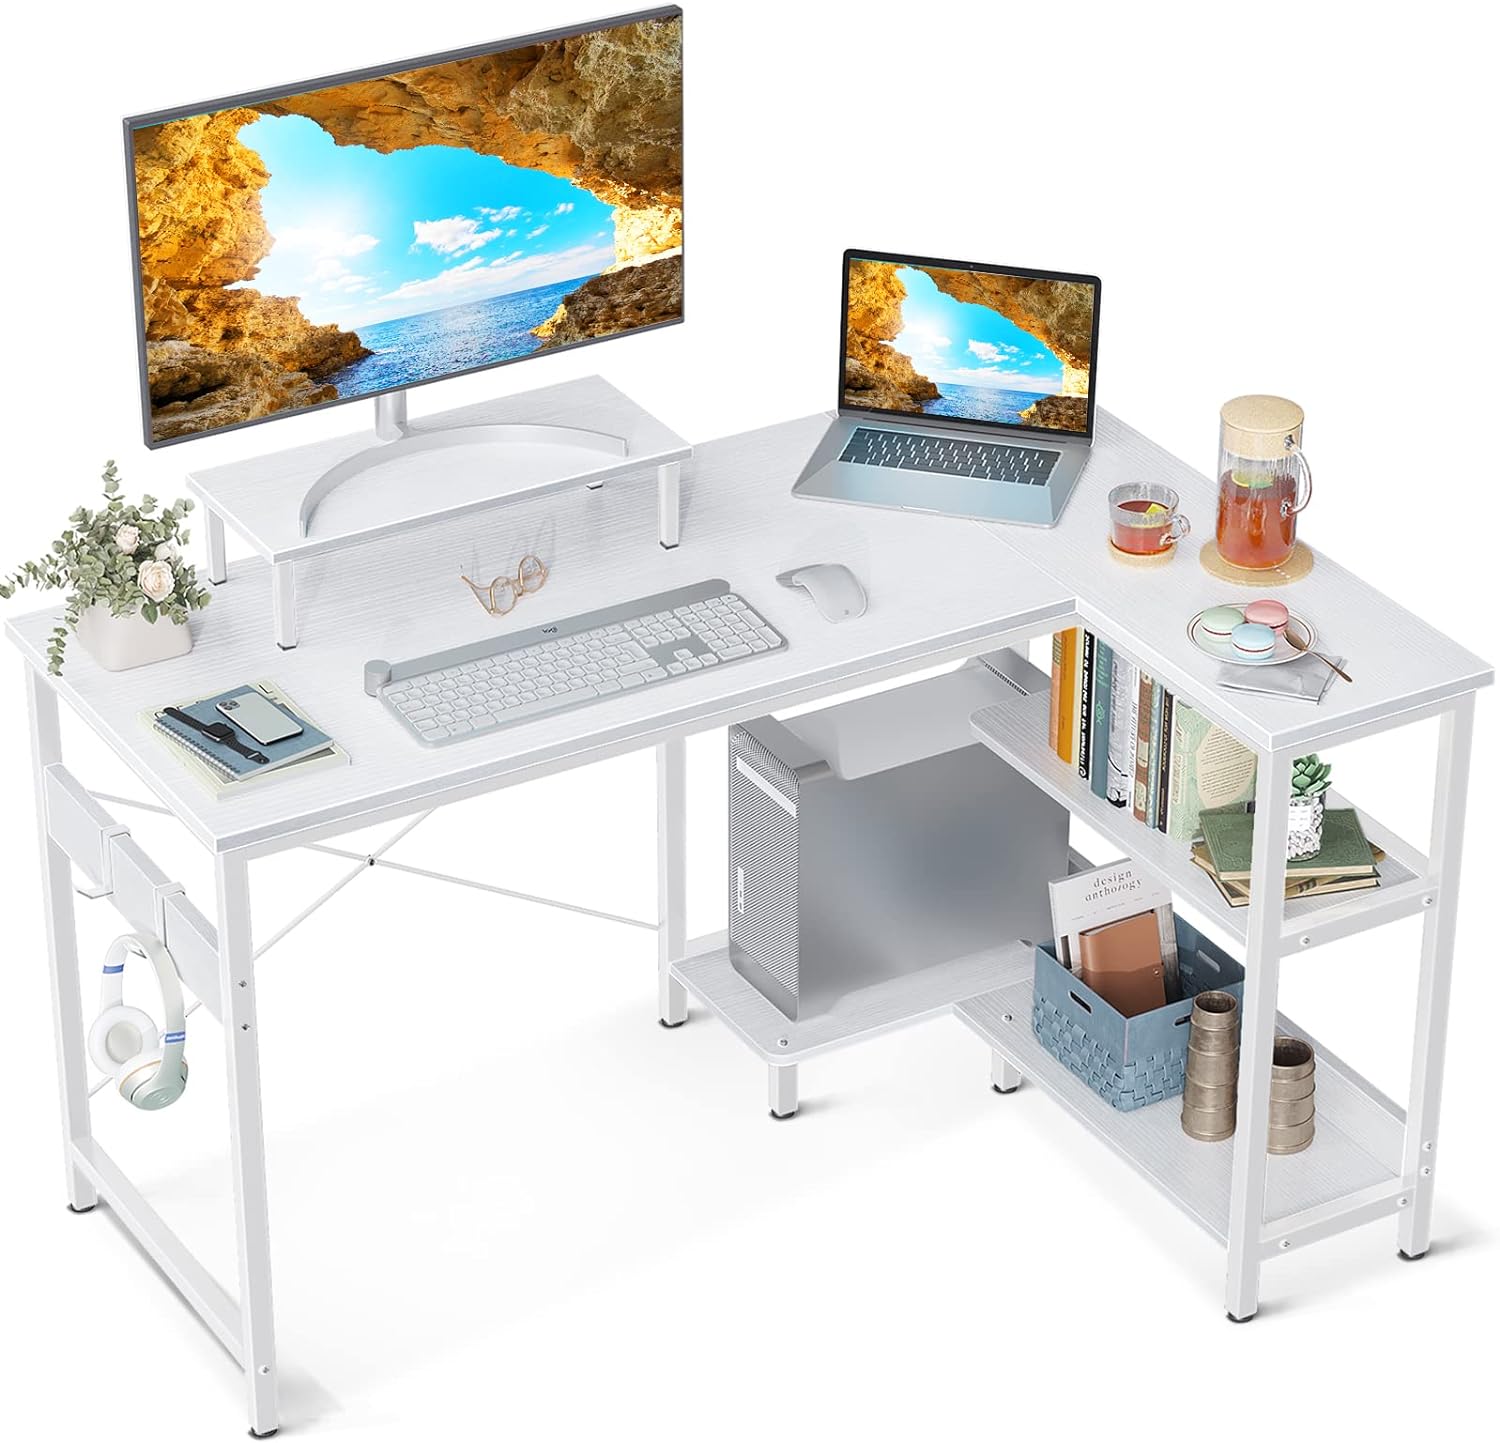 ODK 40 Inch Small L Shaped Computer Desk